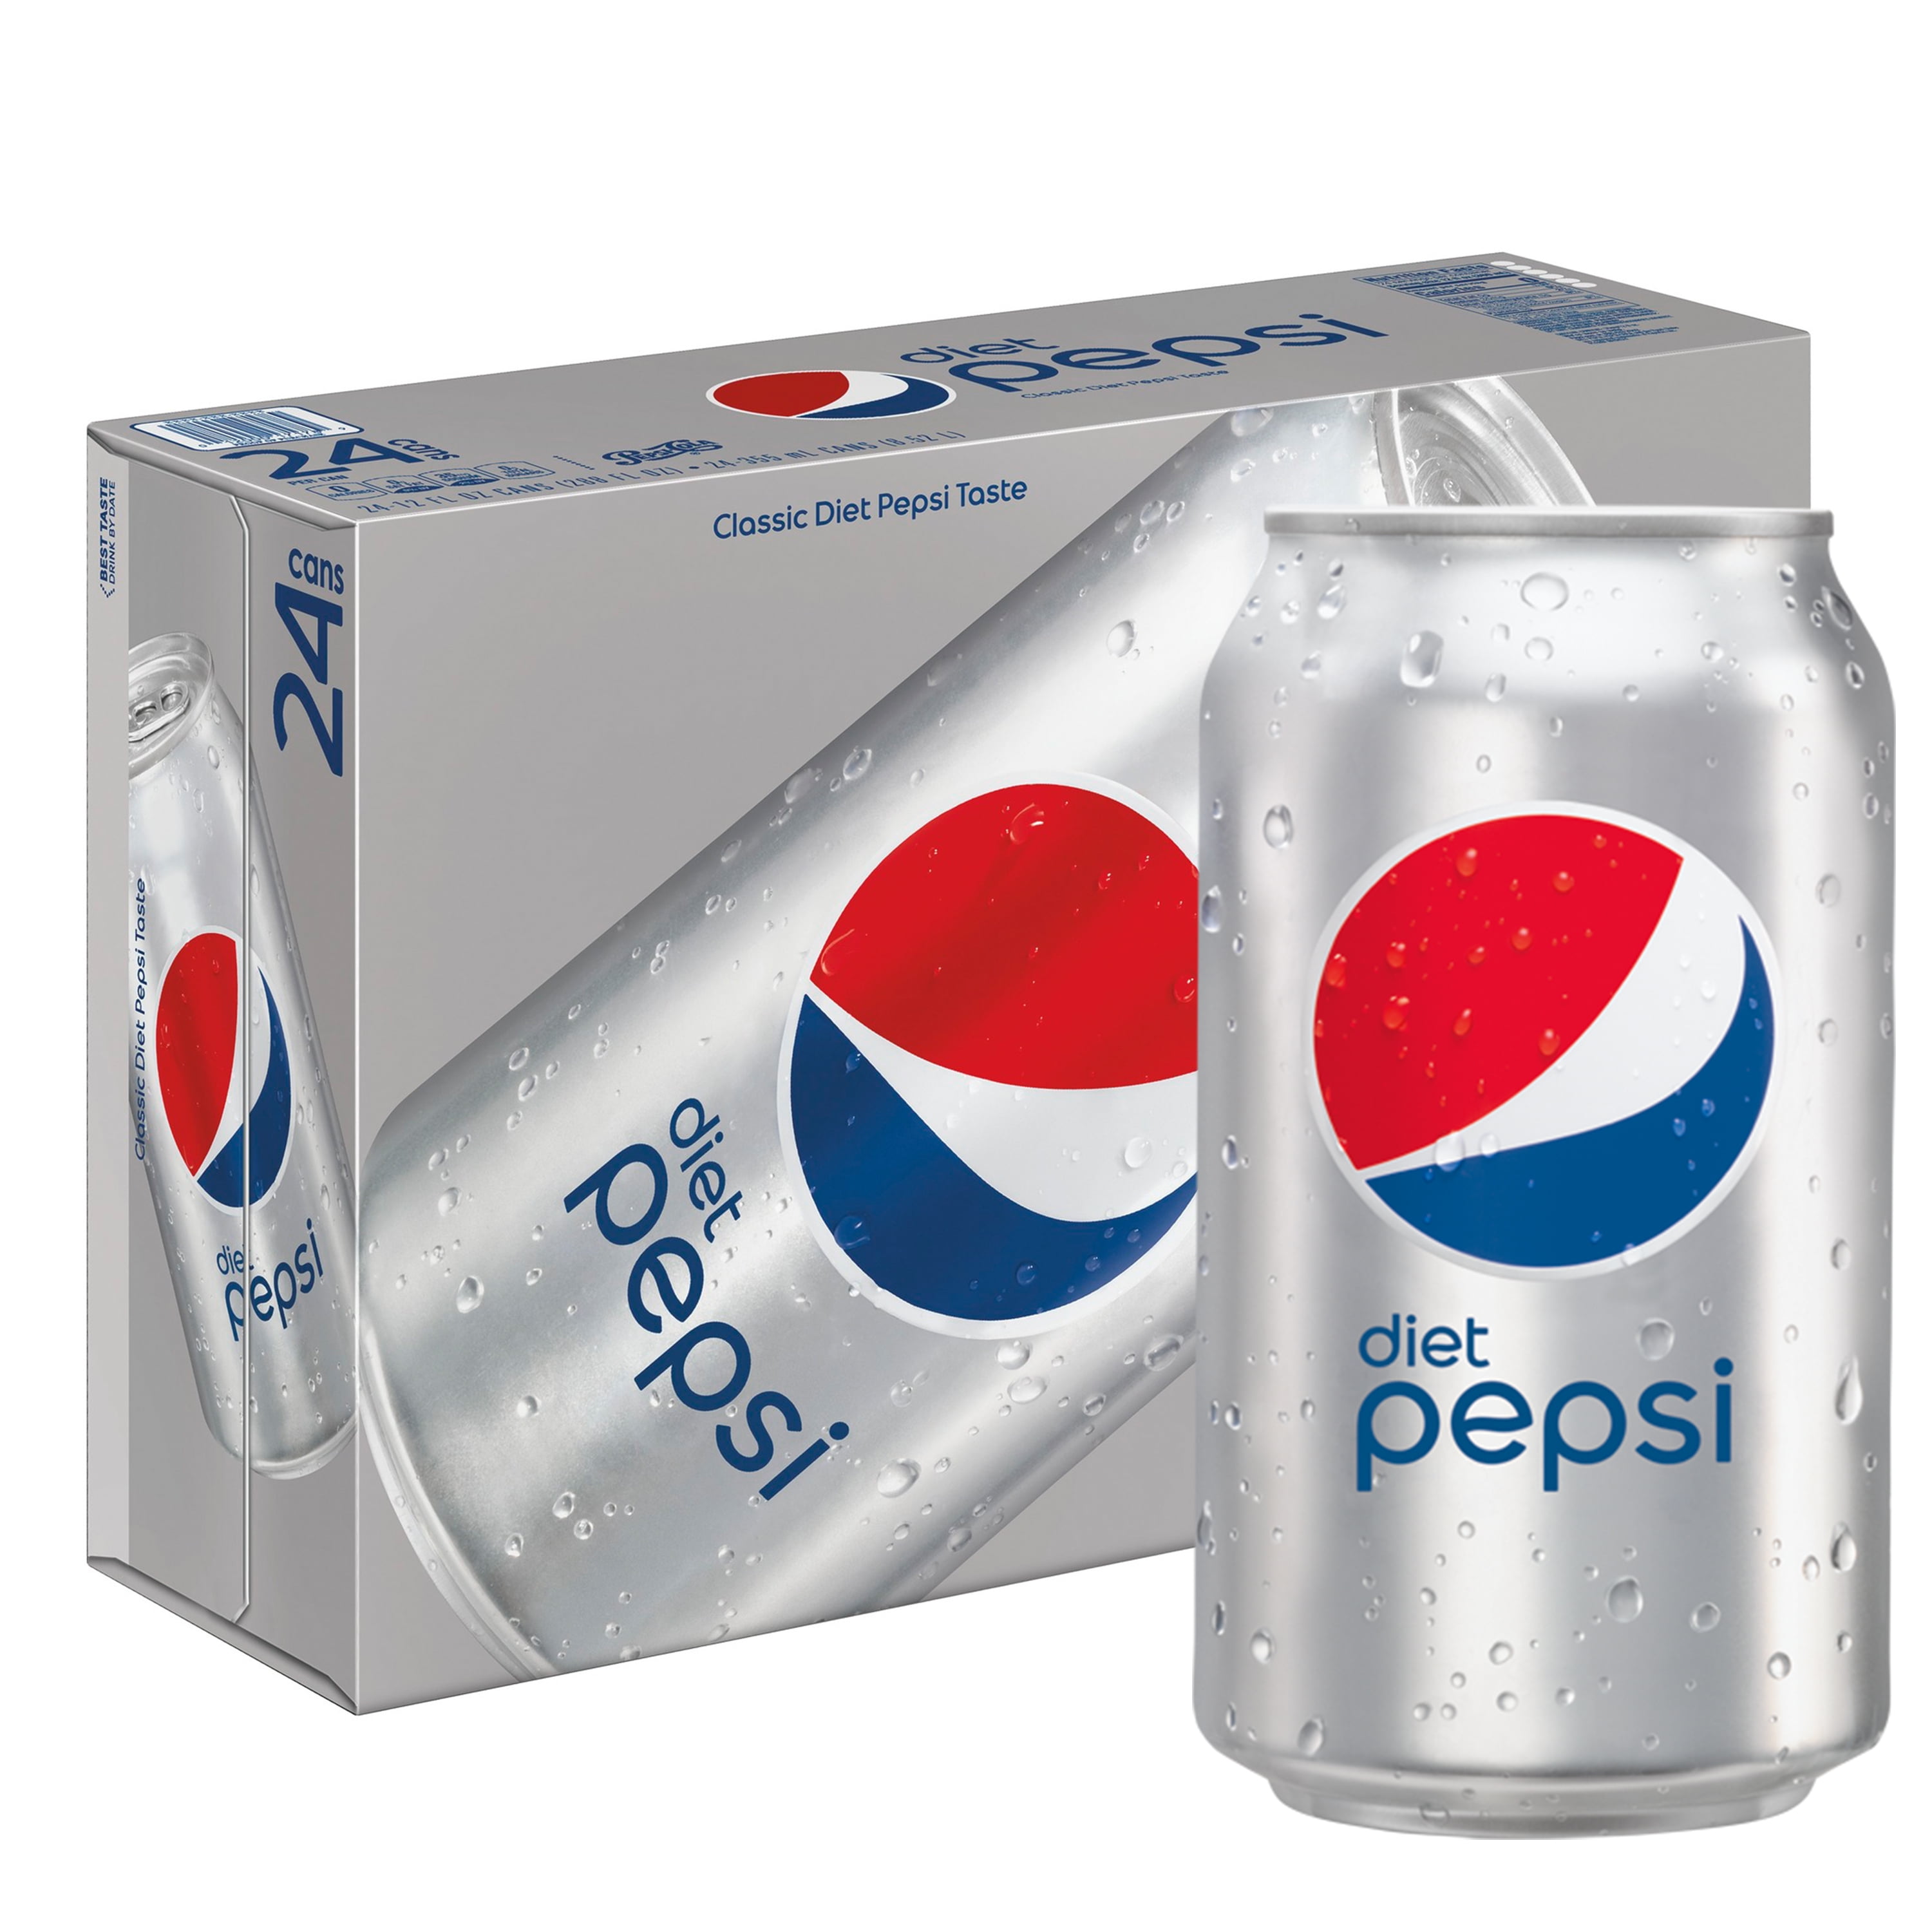 How much is a 24 pack of pepsi at walmart Diet Pepsi Soda 12 Oz Cans 24 Count Walmart Com Walmart Com